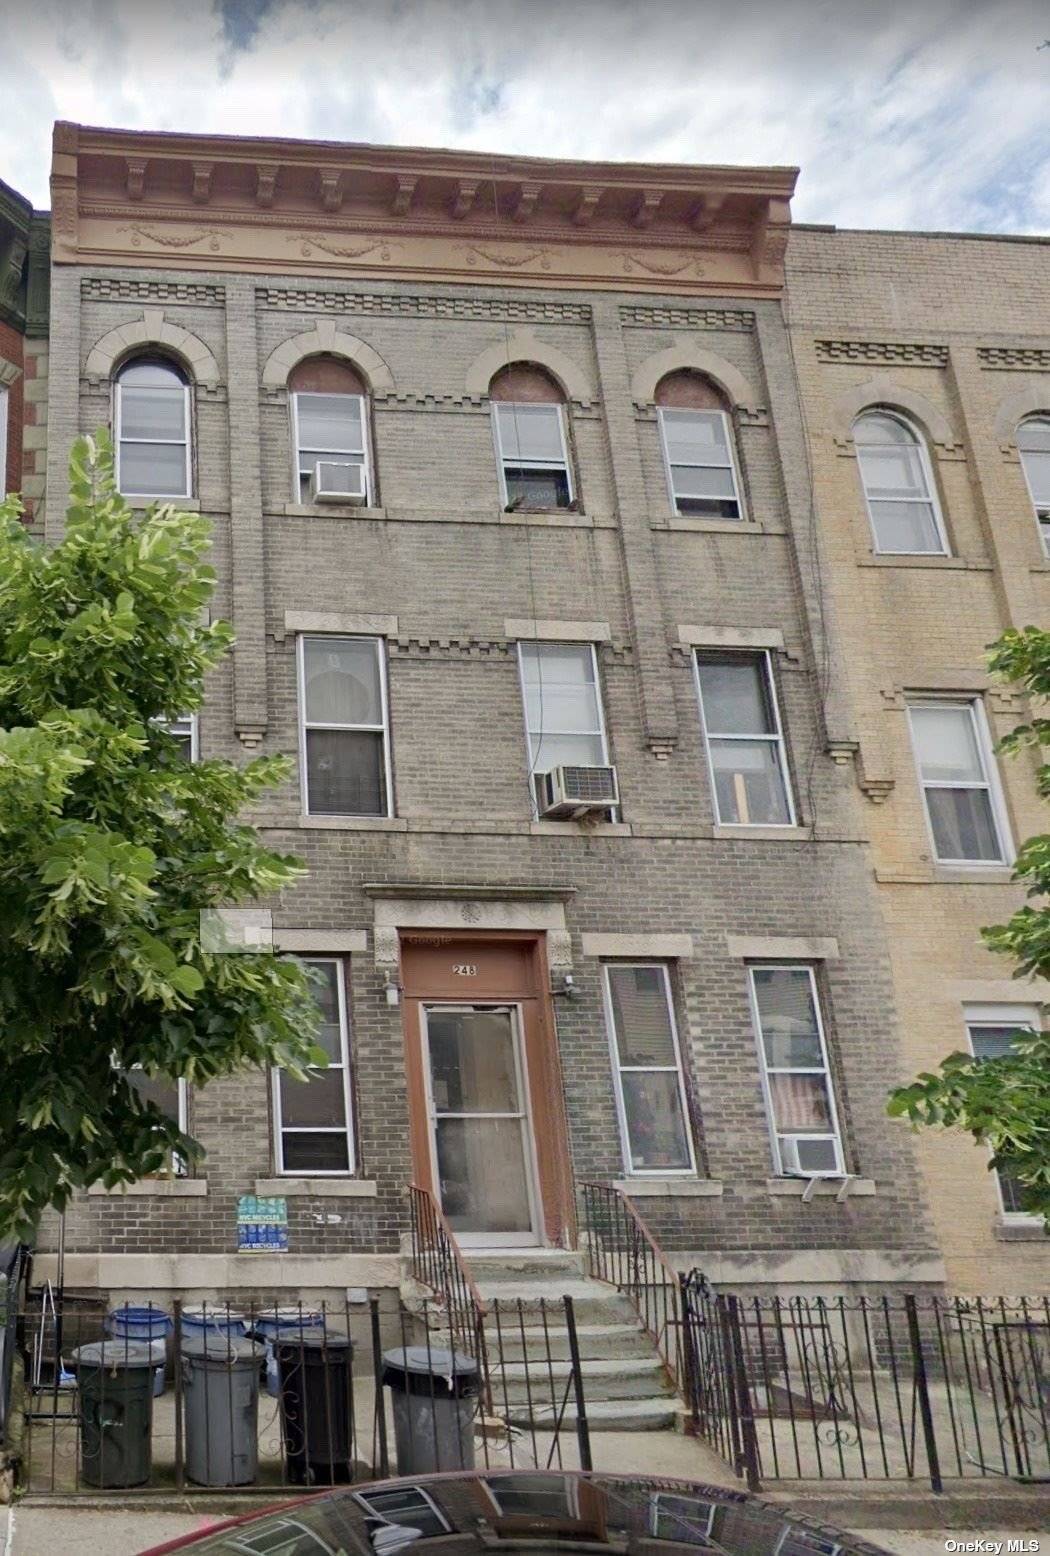 Welcome to Sunset Park, Brooklyn's vibrant and diverse neighborhood, where an incredible opportunity awaits you in the form of a 6 family house with exceptionally low property taxes.